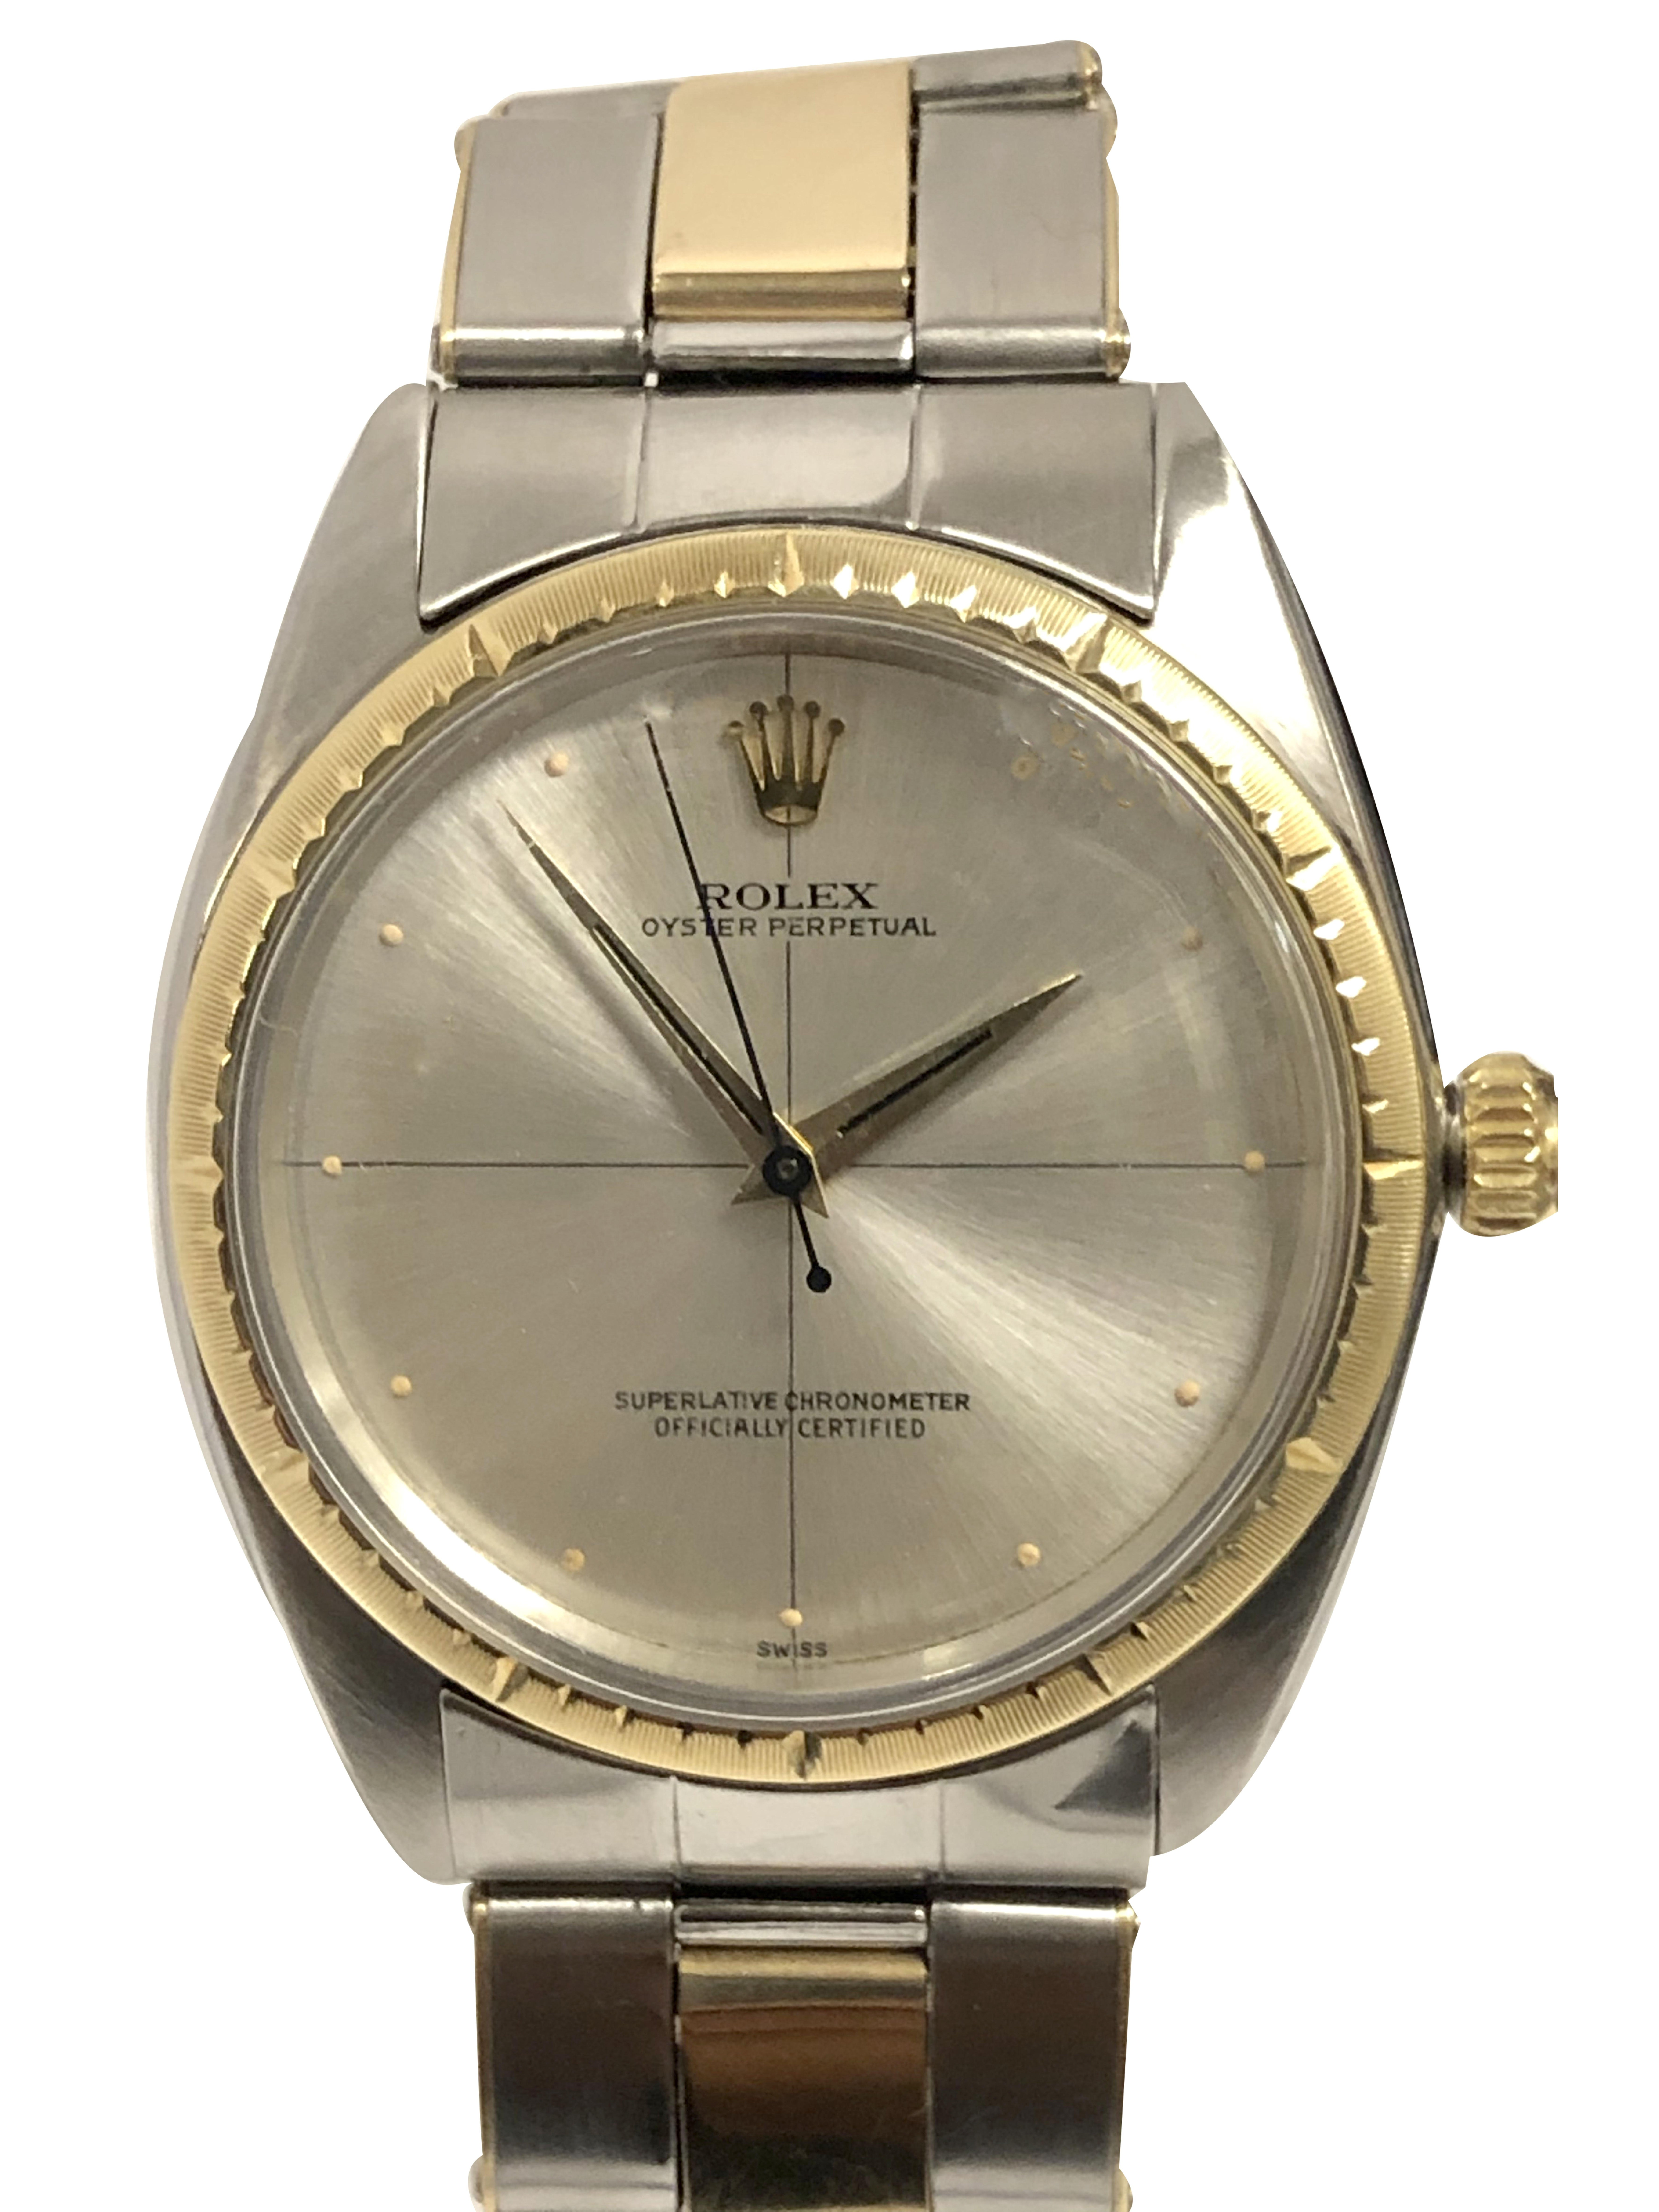 Circa 1950 Rolex Wrist Watch, 34 M.M. Stainless Steel 2 Piece Oyster Case with 14K Yellow Gold Zephyr bezel and Gold Crown. Caliber 1560, 26 Jewel, Automatic self Winding Movement. Original and Mint, Perfect condition Silver Satin dial, Gold Crown